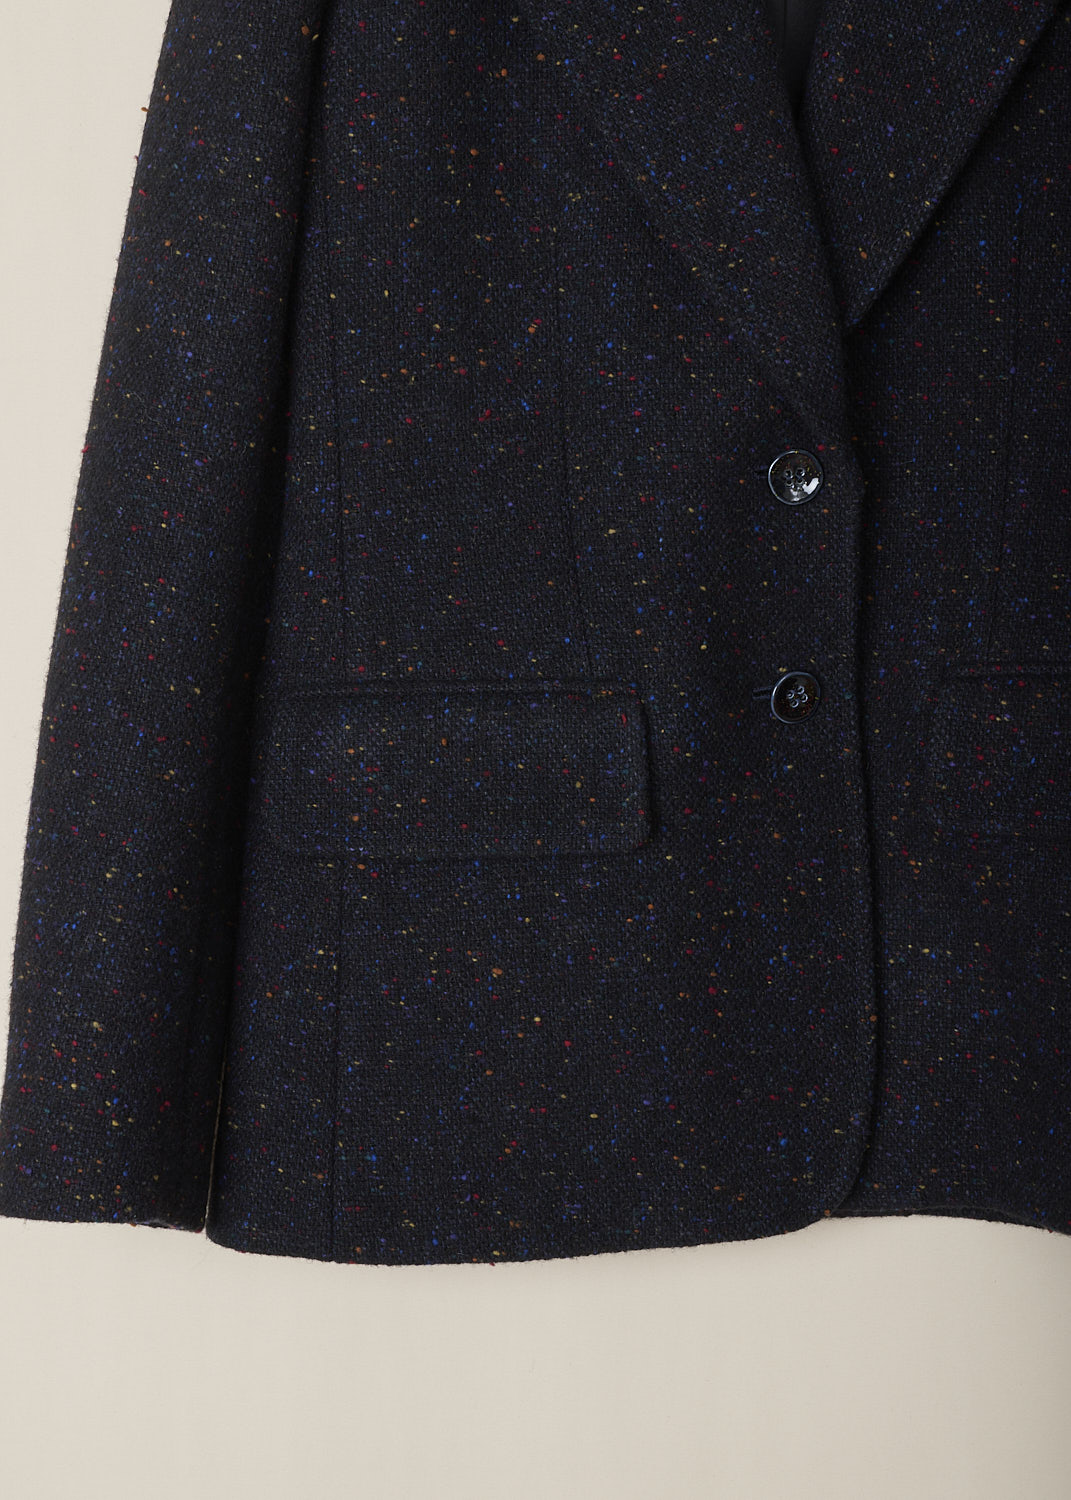 CHLOÃ‰, SINGLE-BREASTED SPECKLED JACKET, CHC22AVE231654D2_anthracite_blue, Blue, Grey, Print, Detail, This single-breasted jacket has an anthracite blue base color with multicolored speckles throughout. The jacket has a notched lapel and a front button closure. The long sleeves have buttoned cuffs. In the front, the jacket ha a single breast pocket and two flap pockets. In the back, the jacket has a centre vent. The jacket has a straight hemline.
